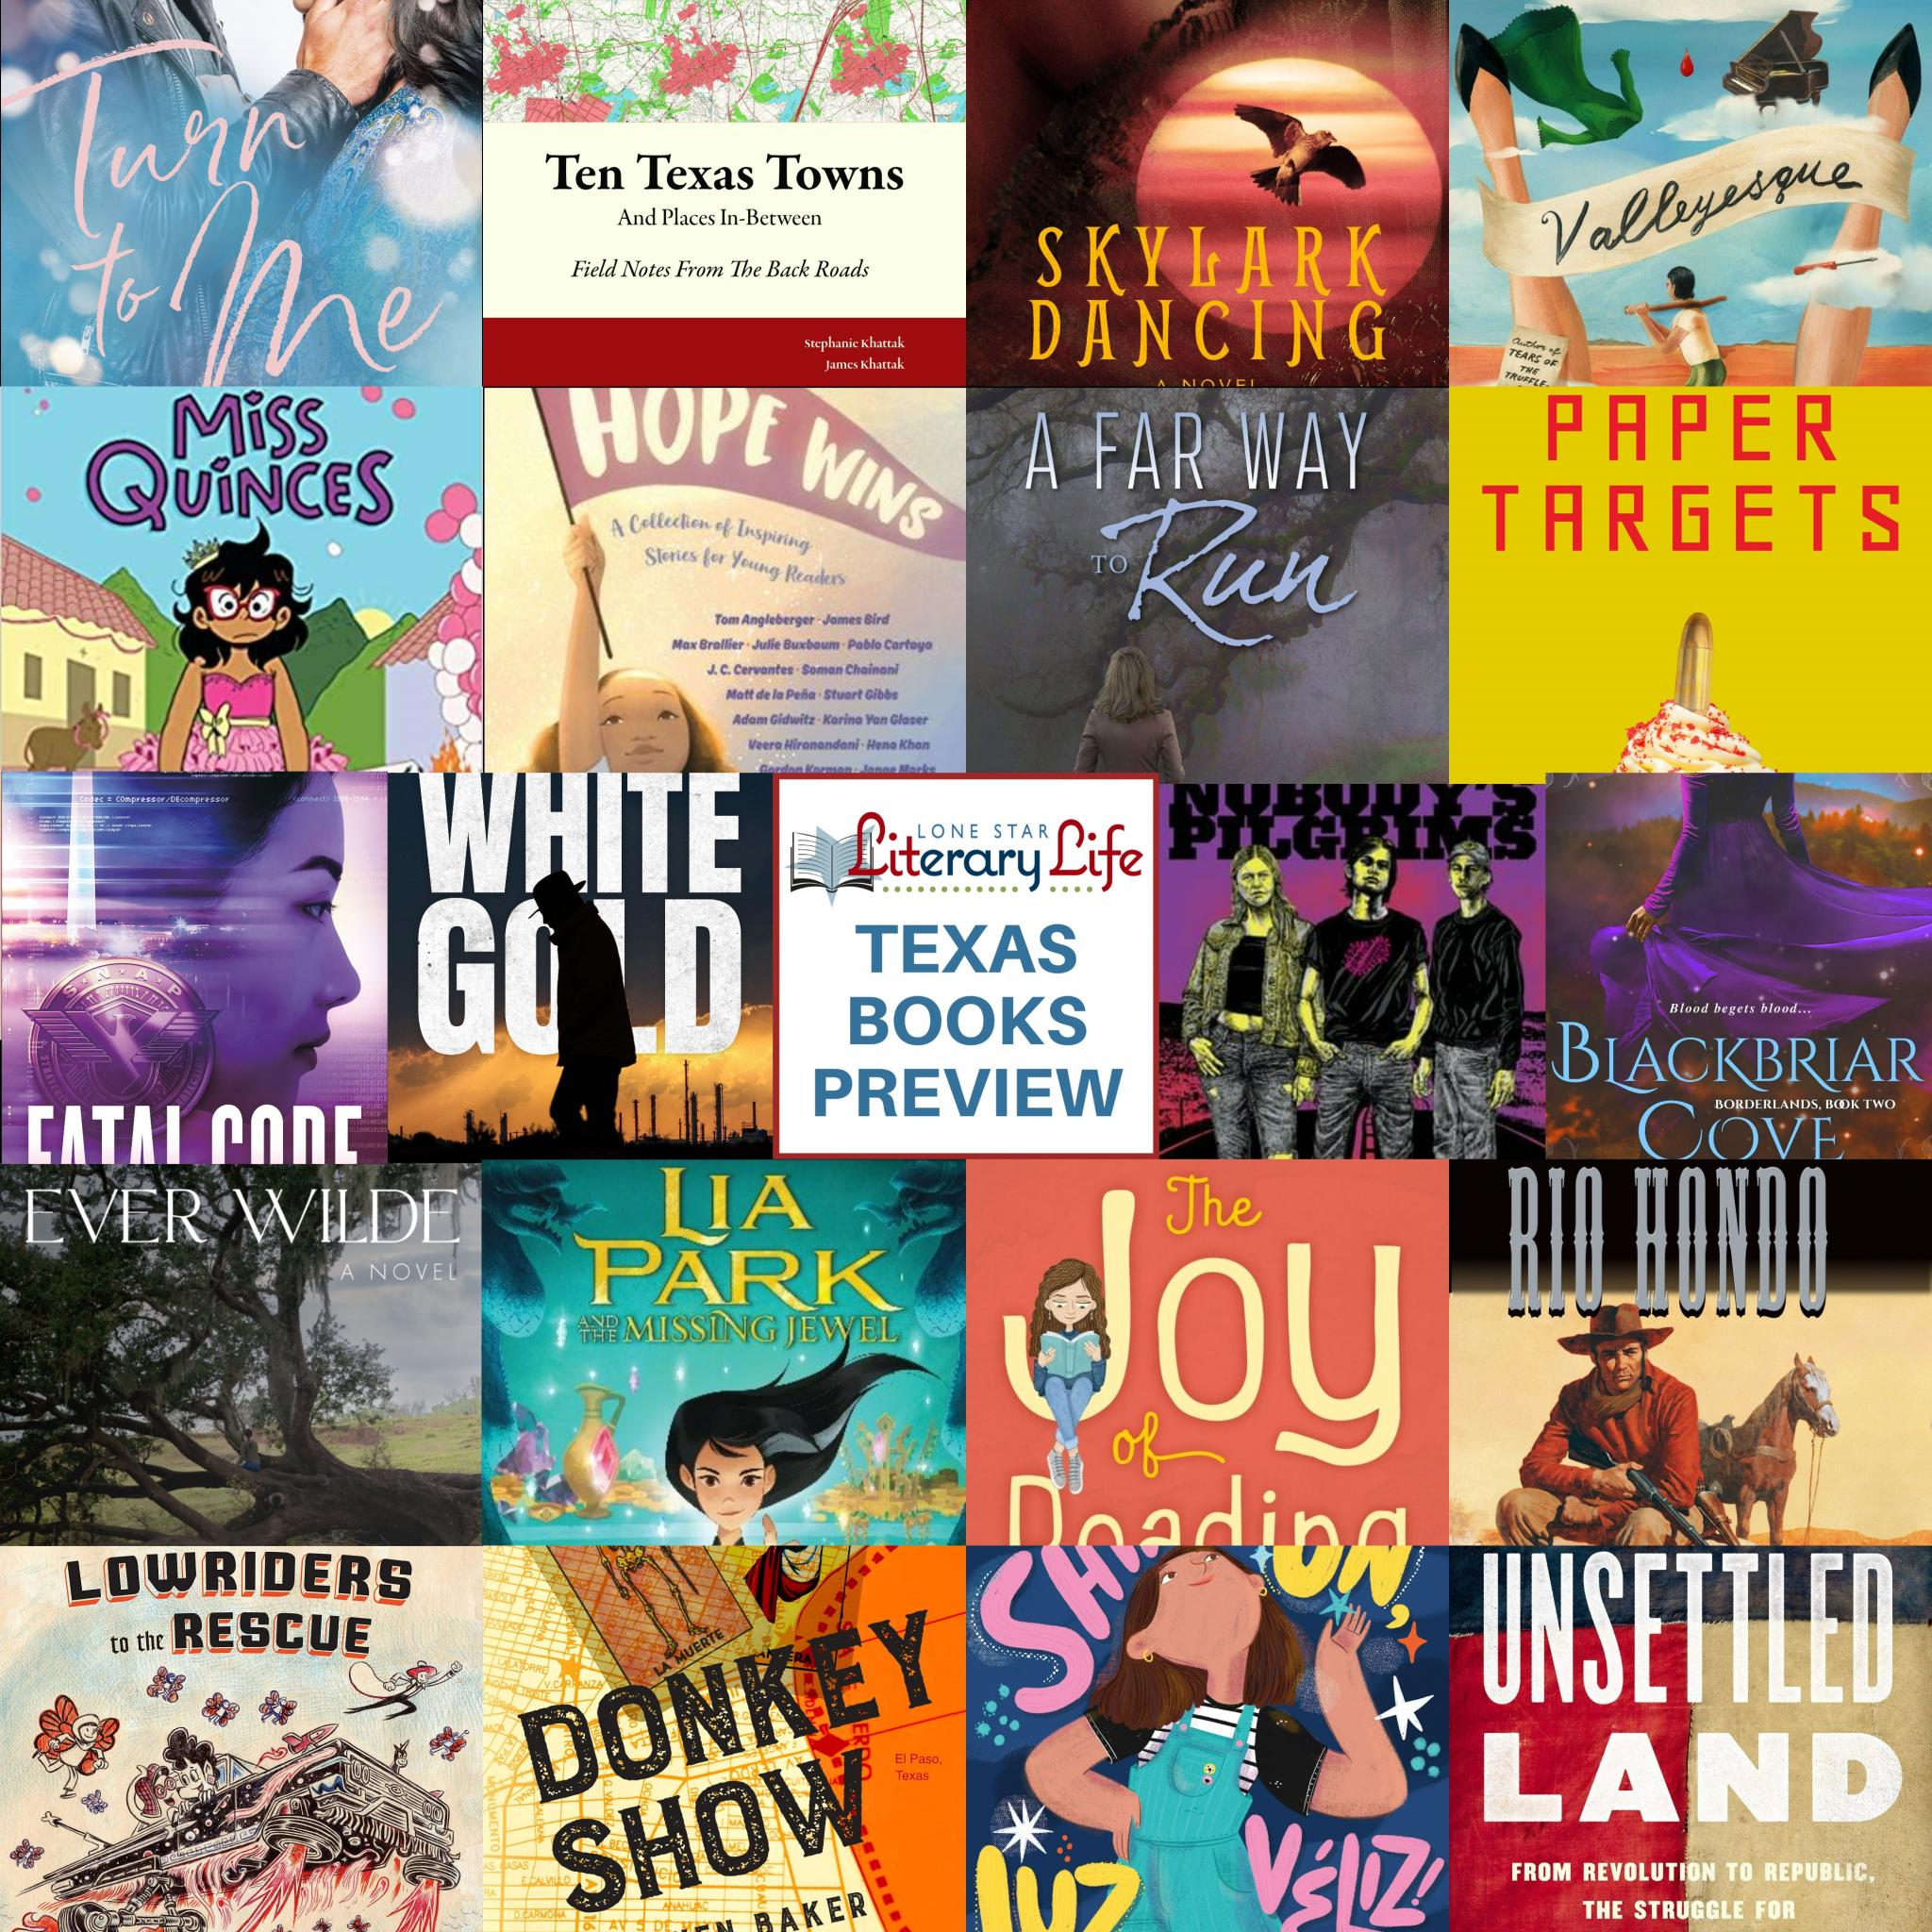 May 2022 Texas Books Preview Lone Star Literary Life